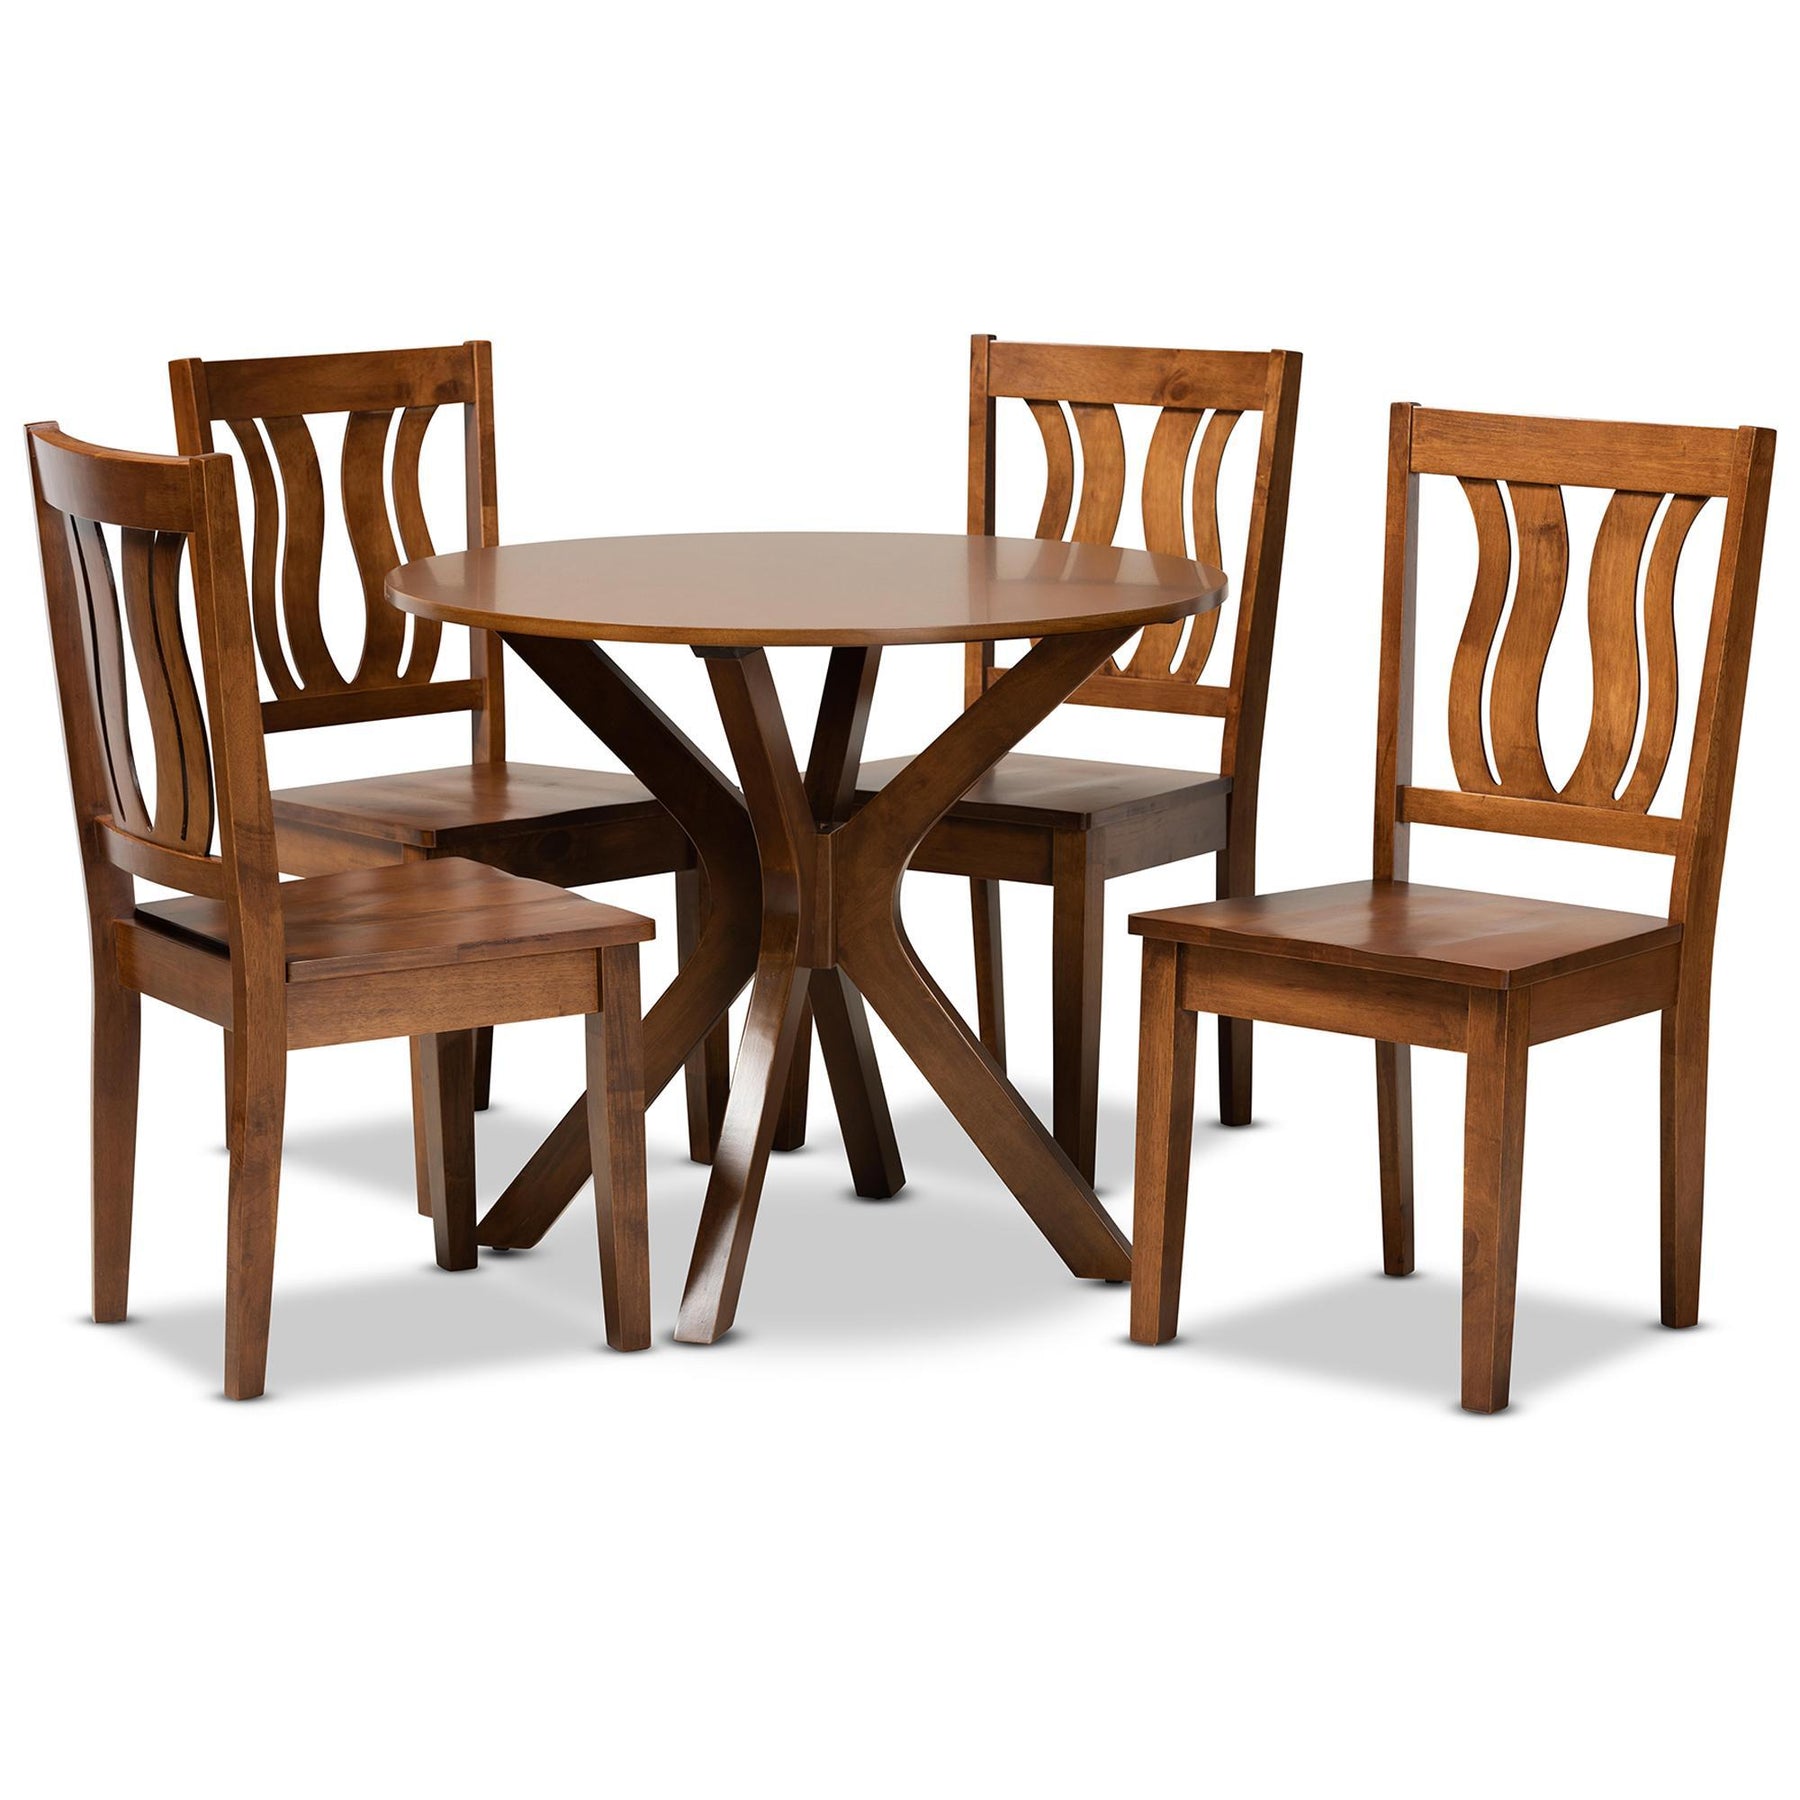 Baxton Studio Mare Modern And Contemporary Transitional Walnut Brown Finished Wood 5-Piece Dining Set - Mare-Walnut-5PC Dining Set